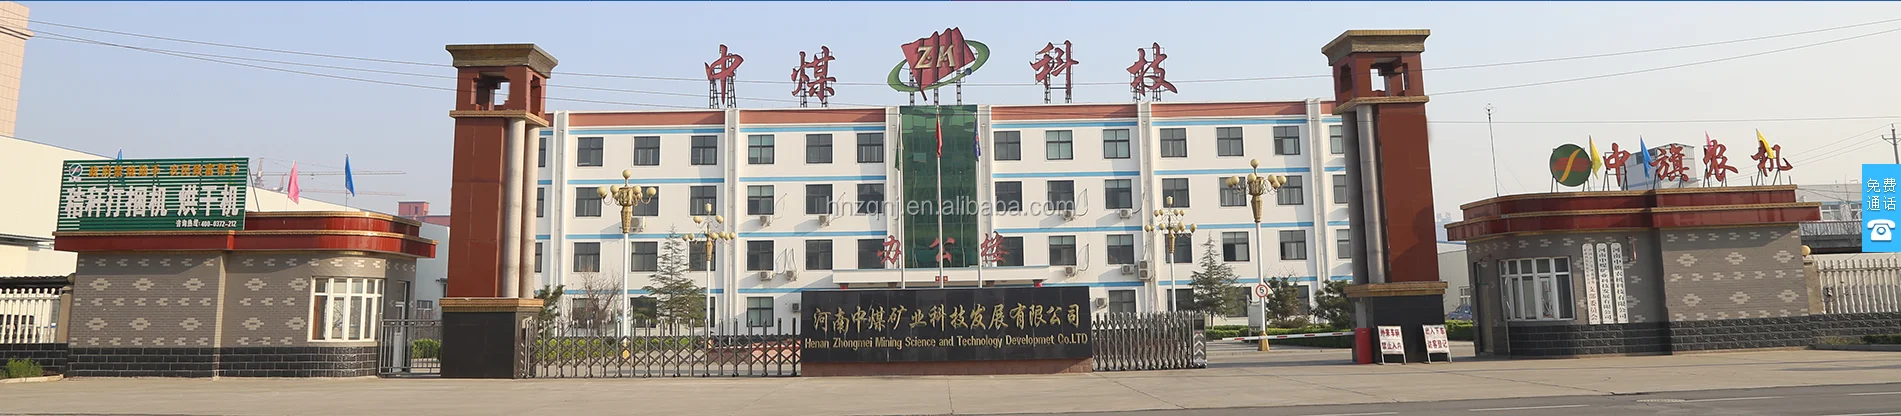 Best Selling TianZhongQI60T/100T/150T Agricultural dryer Machine for corn,soy,wheat grain drying tower for sale